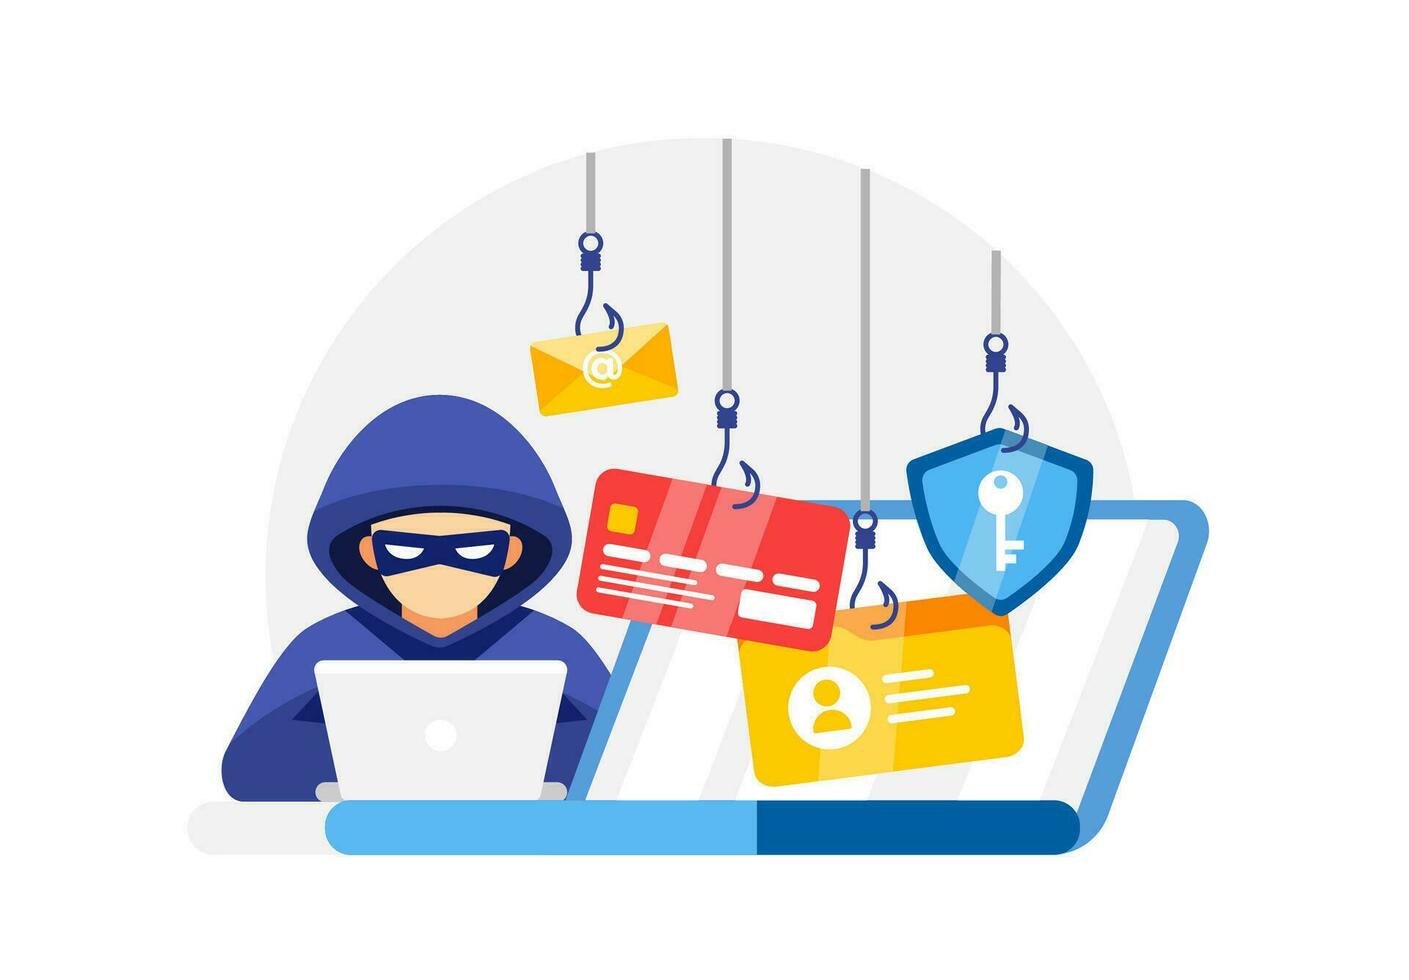 Cybersecurity concept vector illustration showing a hacker with phishing hooks targeting email, credit card, and secure data